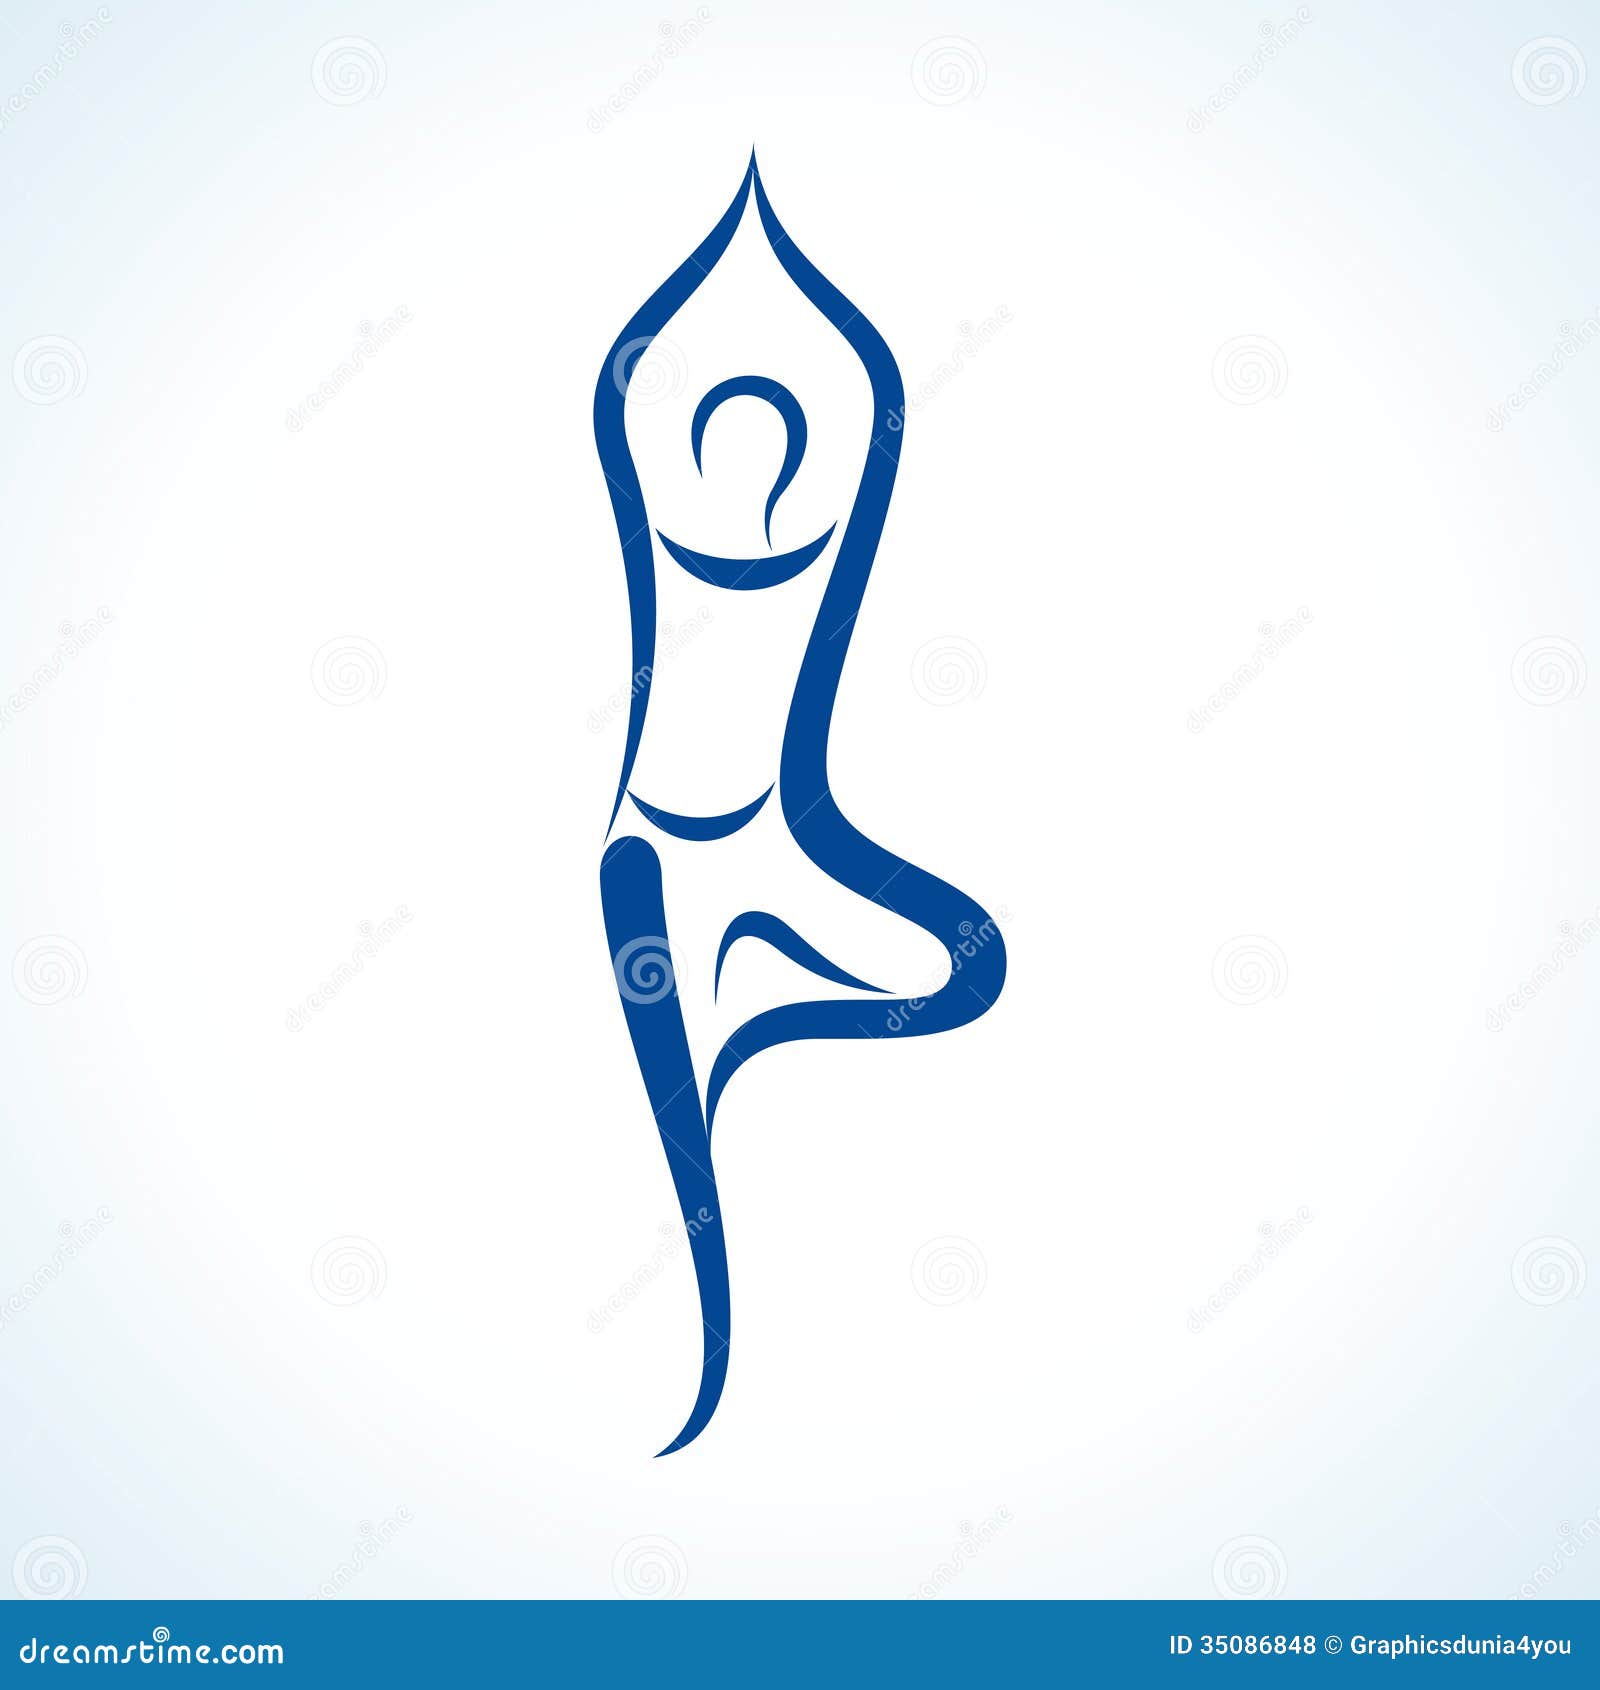 clipart images of yoga poses - photo #48